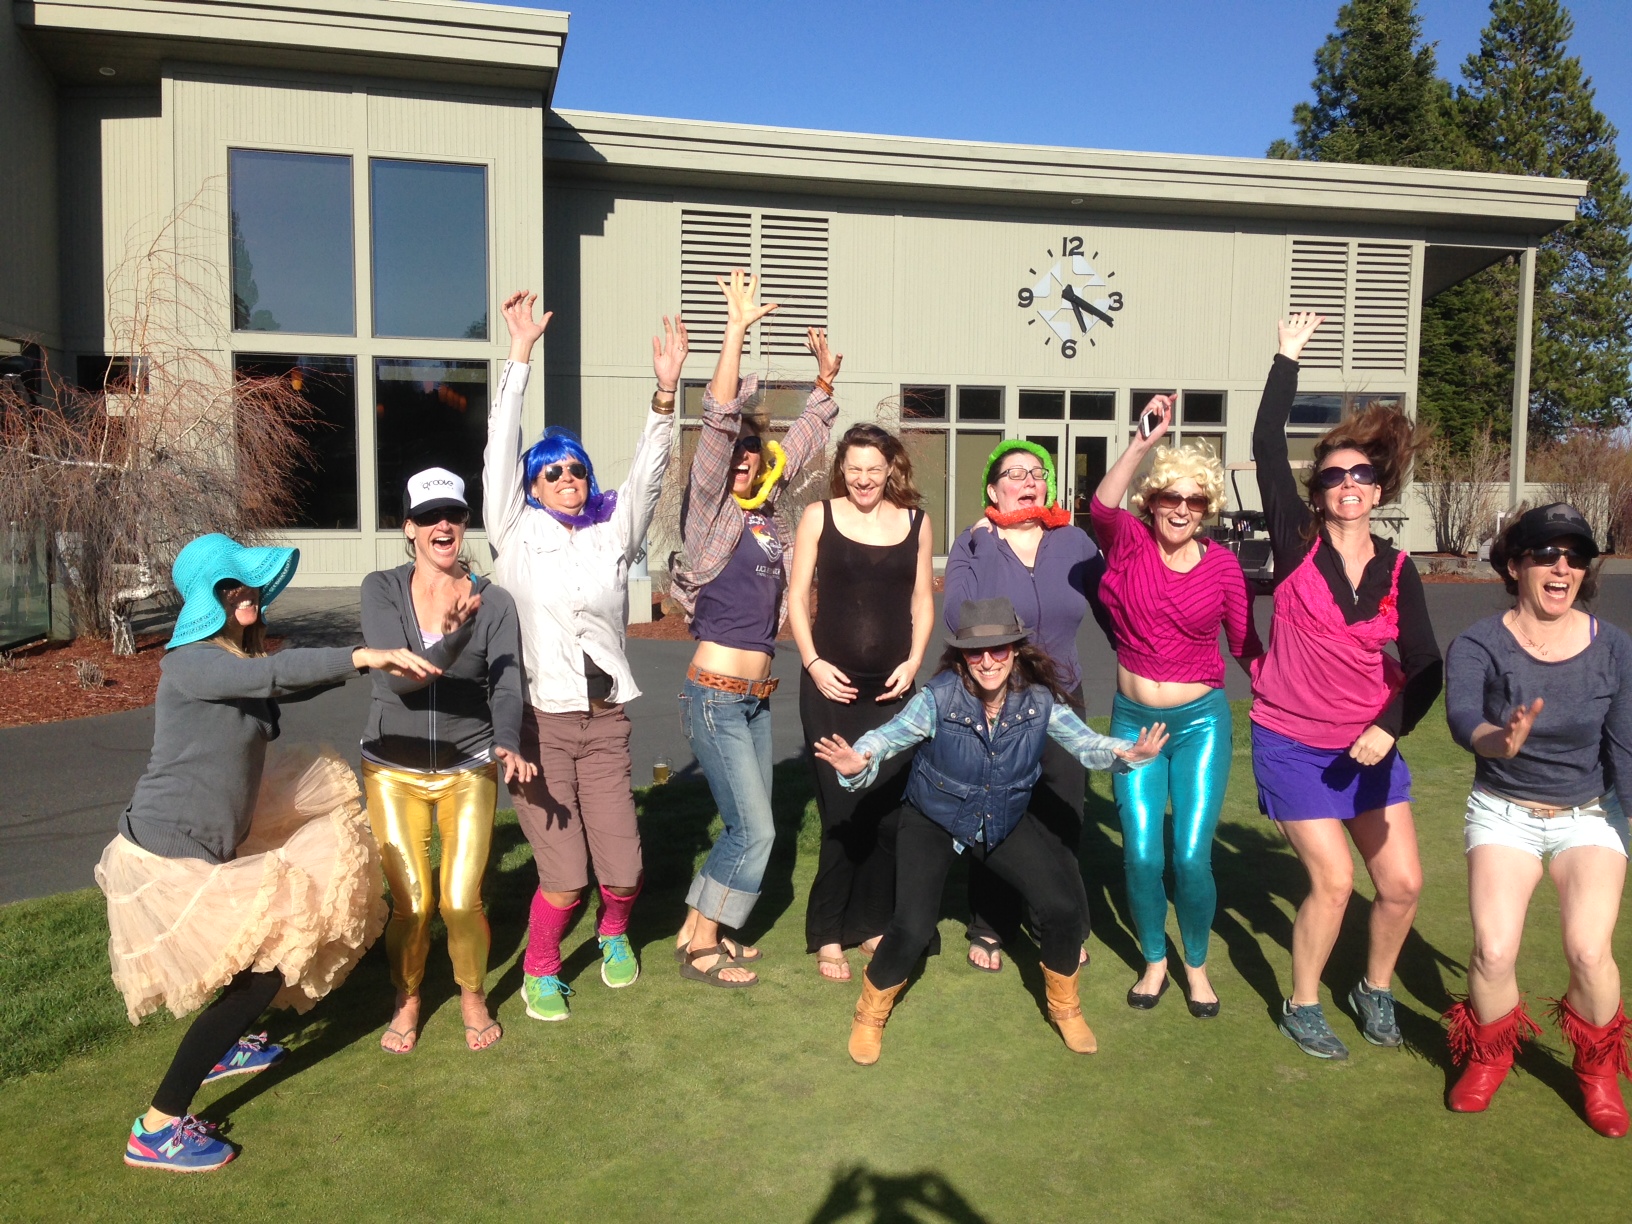 Bachelorette Party in Bend - On the Horizon Line Blog - brianna randall